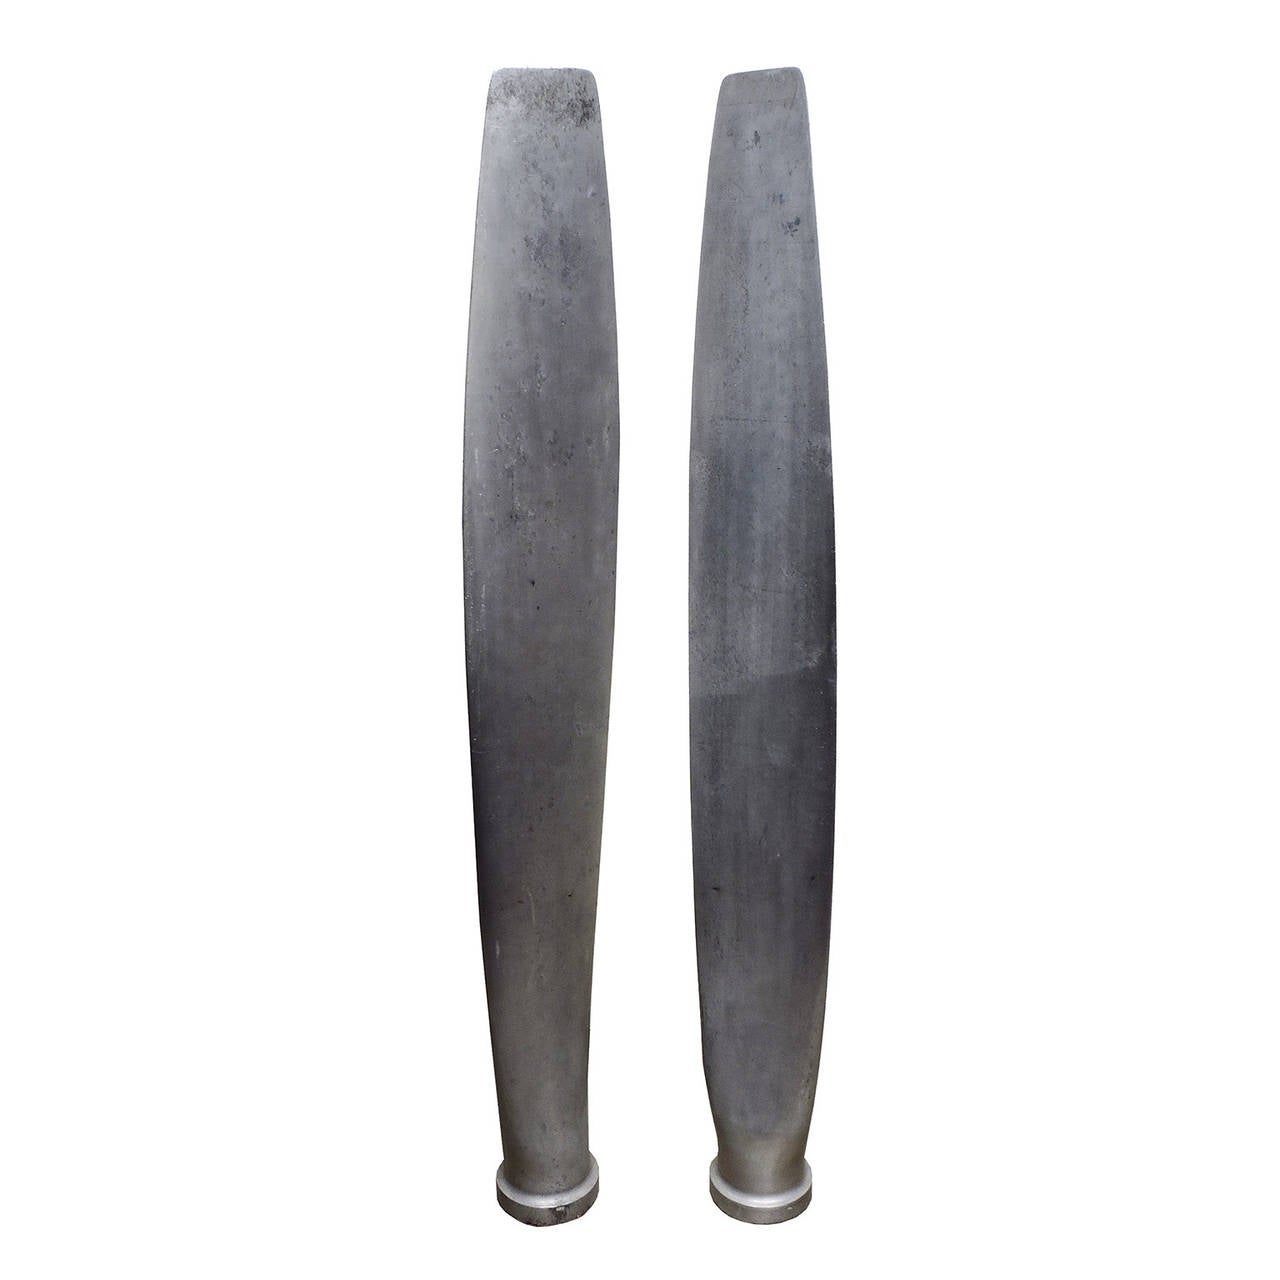 Pair of Hartzell aluminum propellers, serial n. H01578V and marked test no. OCO4. Measures: Length 43 inches, width 6 3/8 inches.
Great sculptural objects for hanging or freestanding.